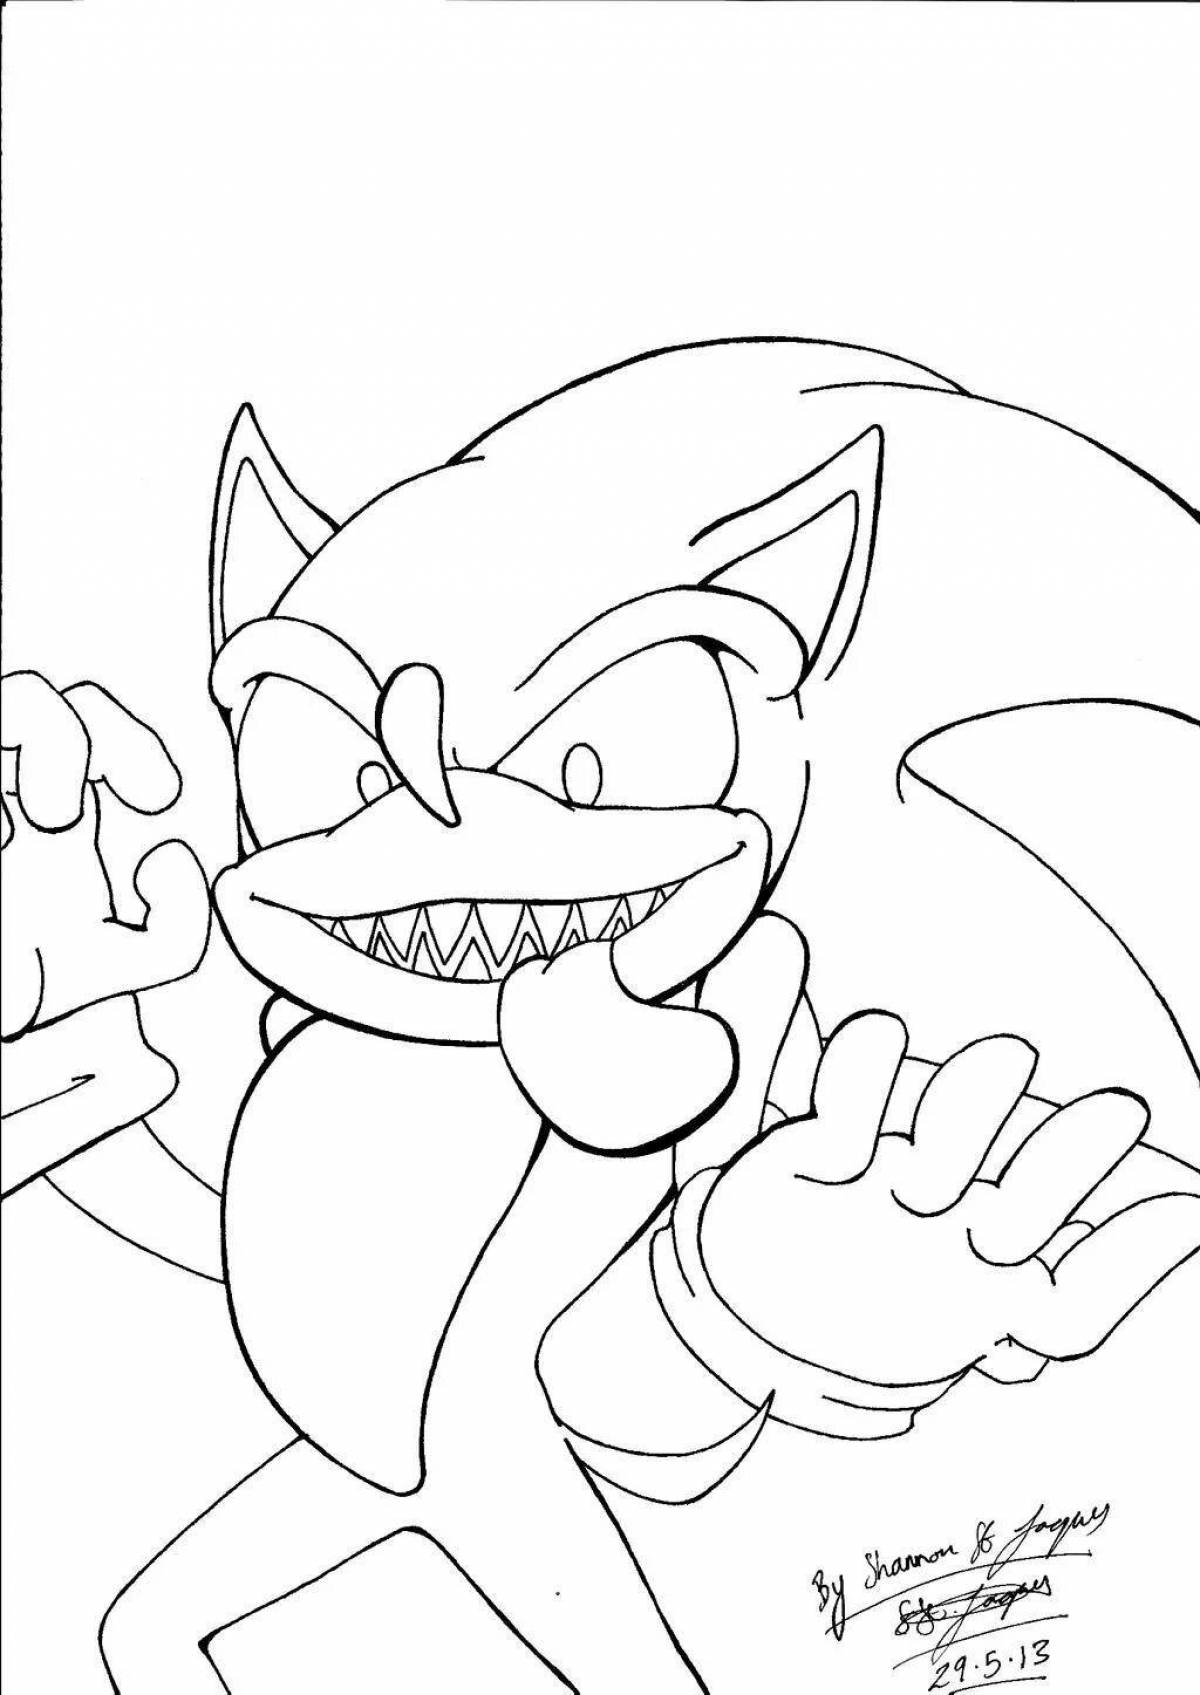 Colorful sonic egze coloring page